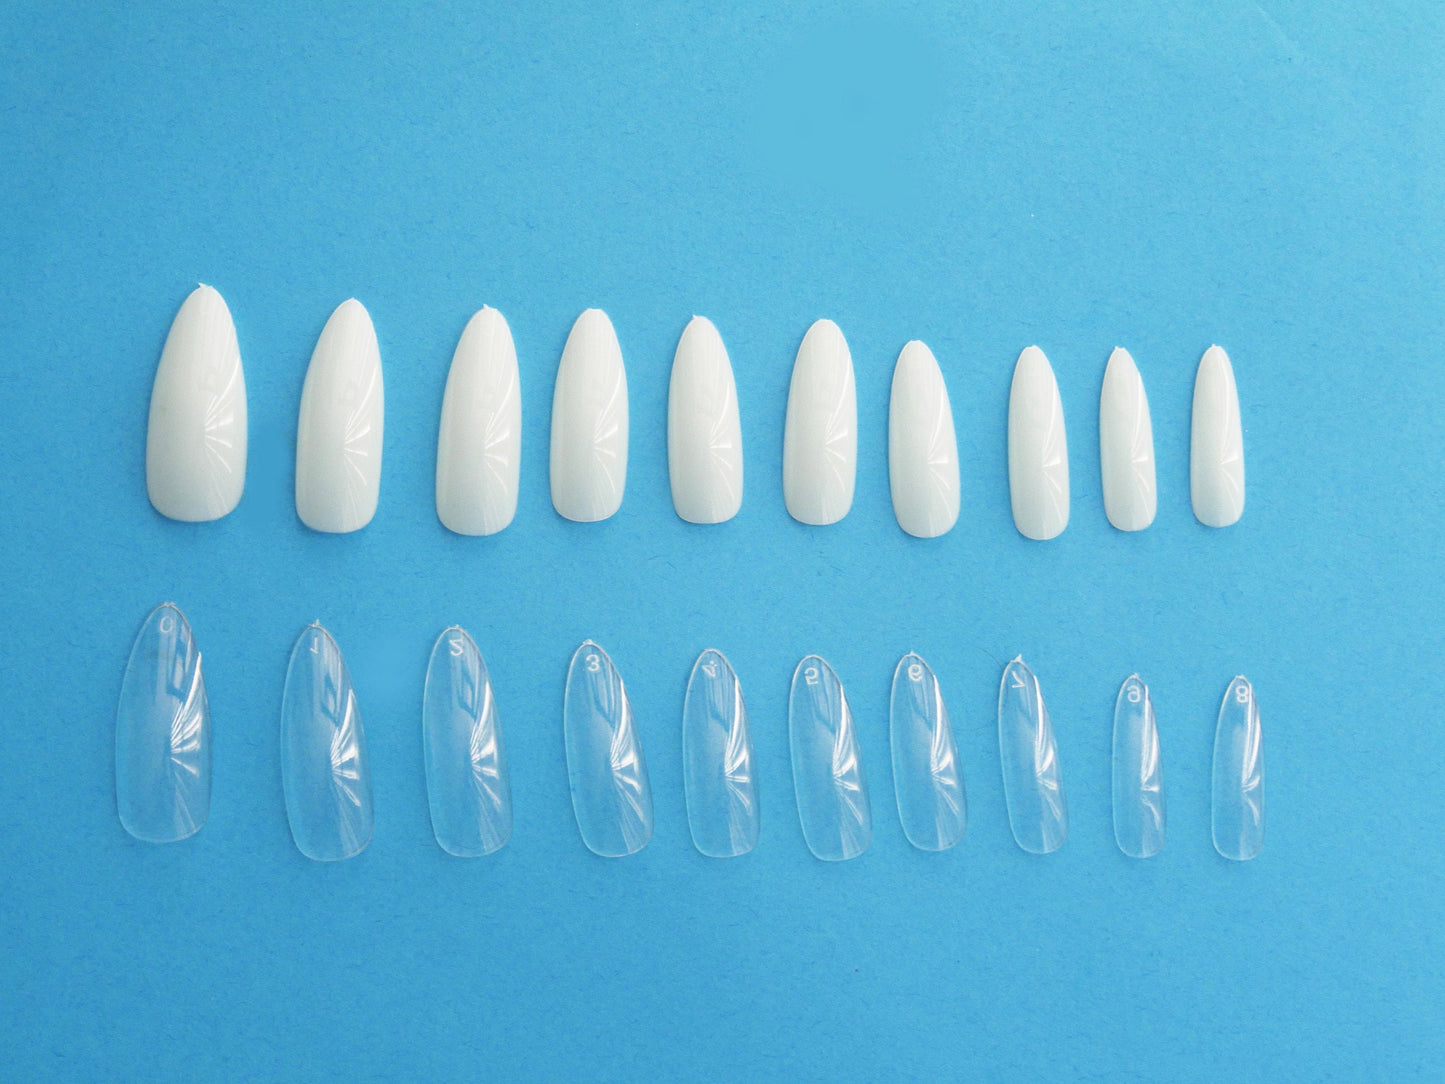 100 pcs Full Cover Stiletto Almond False Fake Nails Tips Manicure nail well tips/ Clear full Acrylic UV Gel Manicure Nail Tips